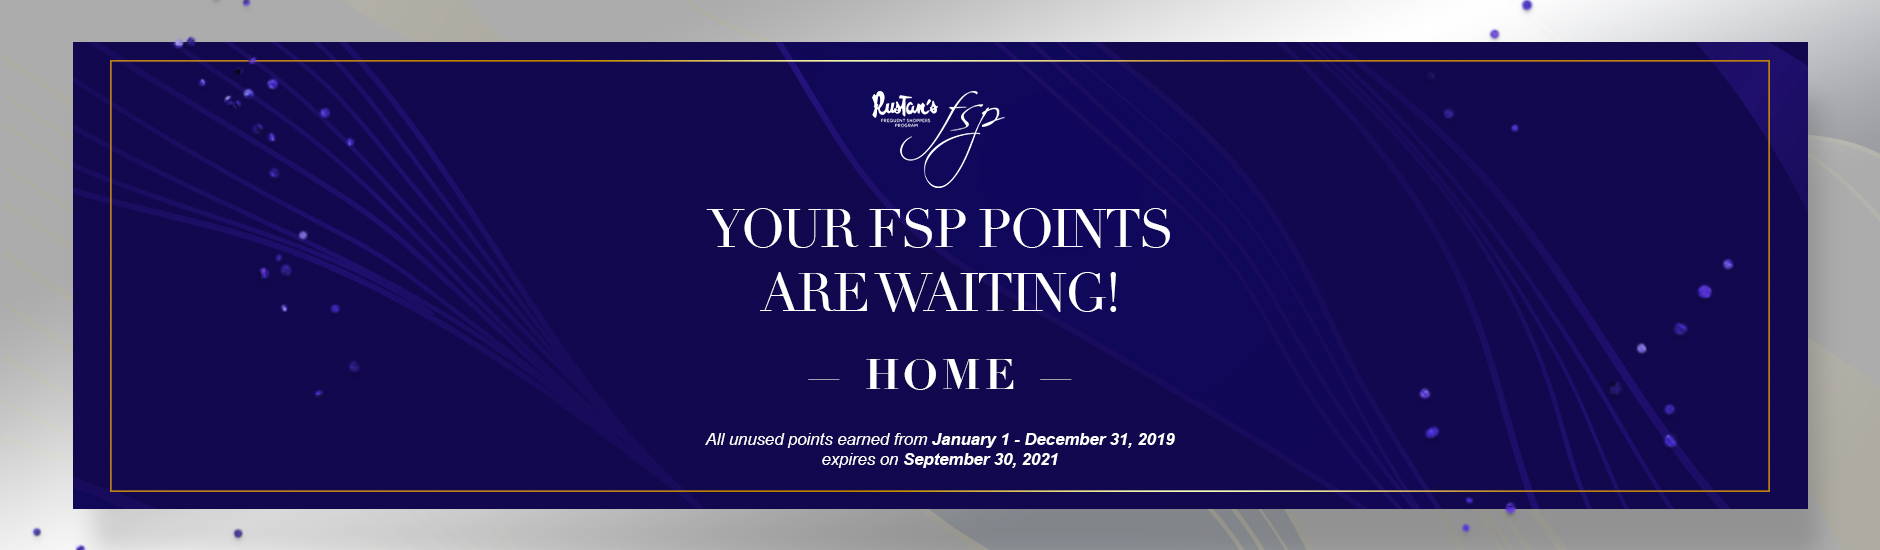 Your FSP Points are Waiting this September: Home